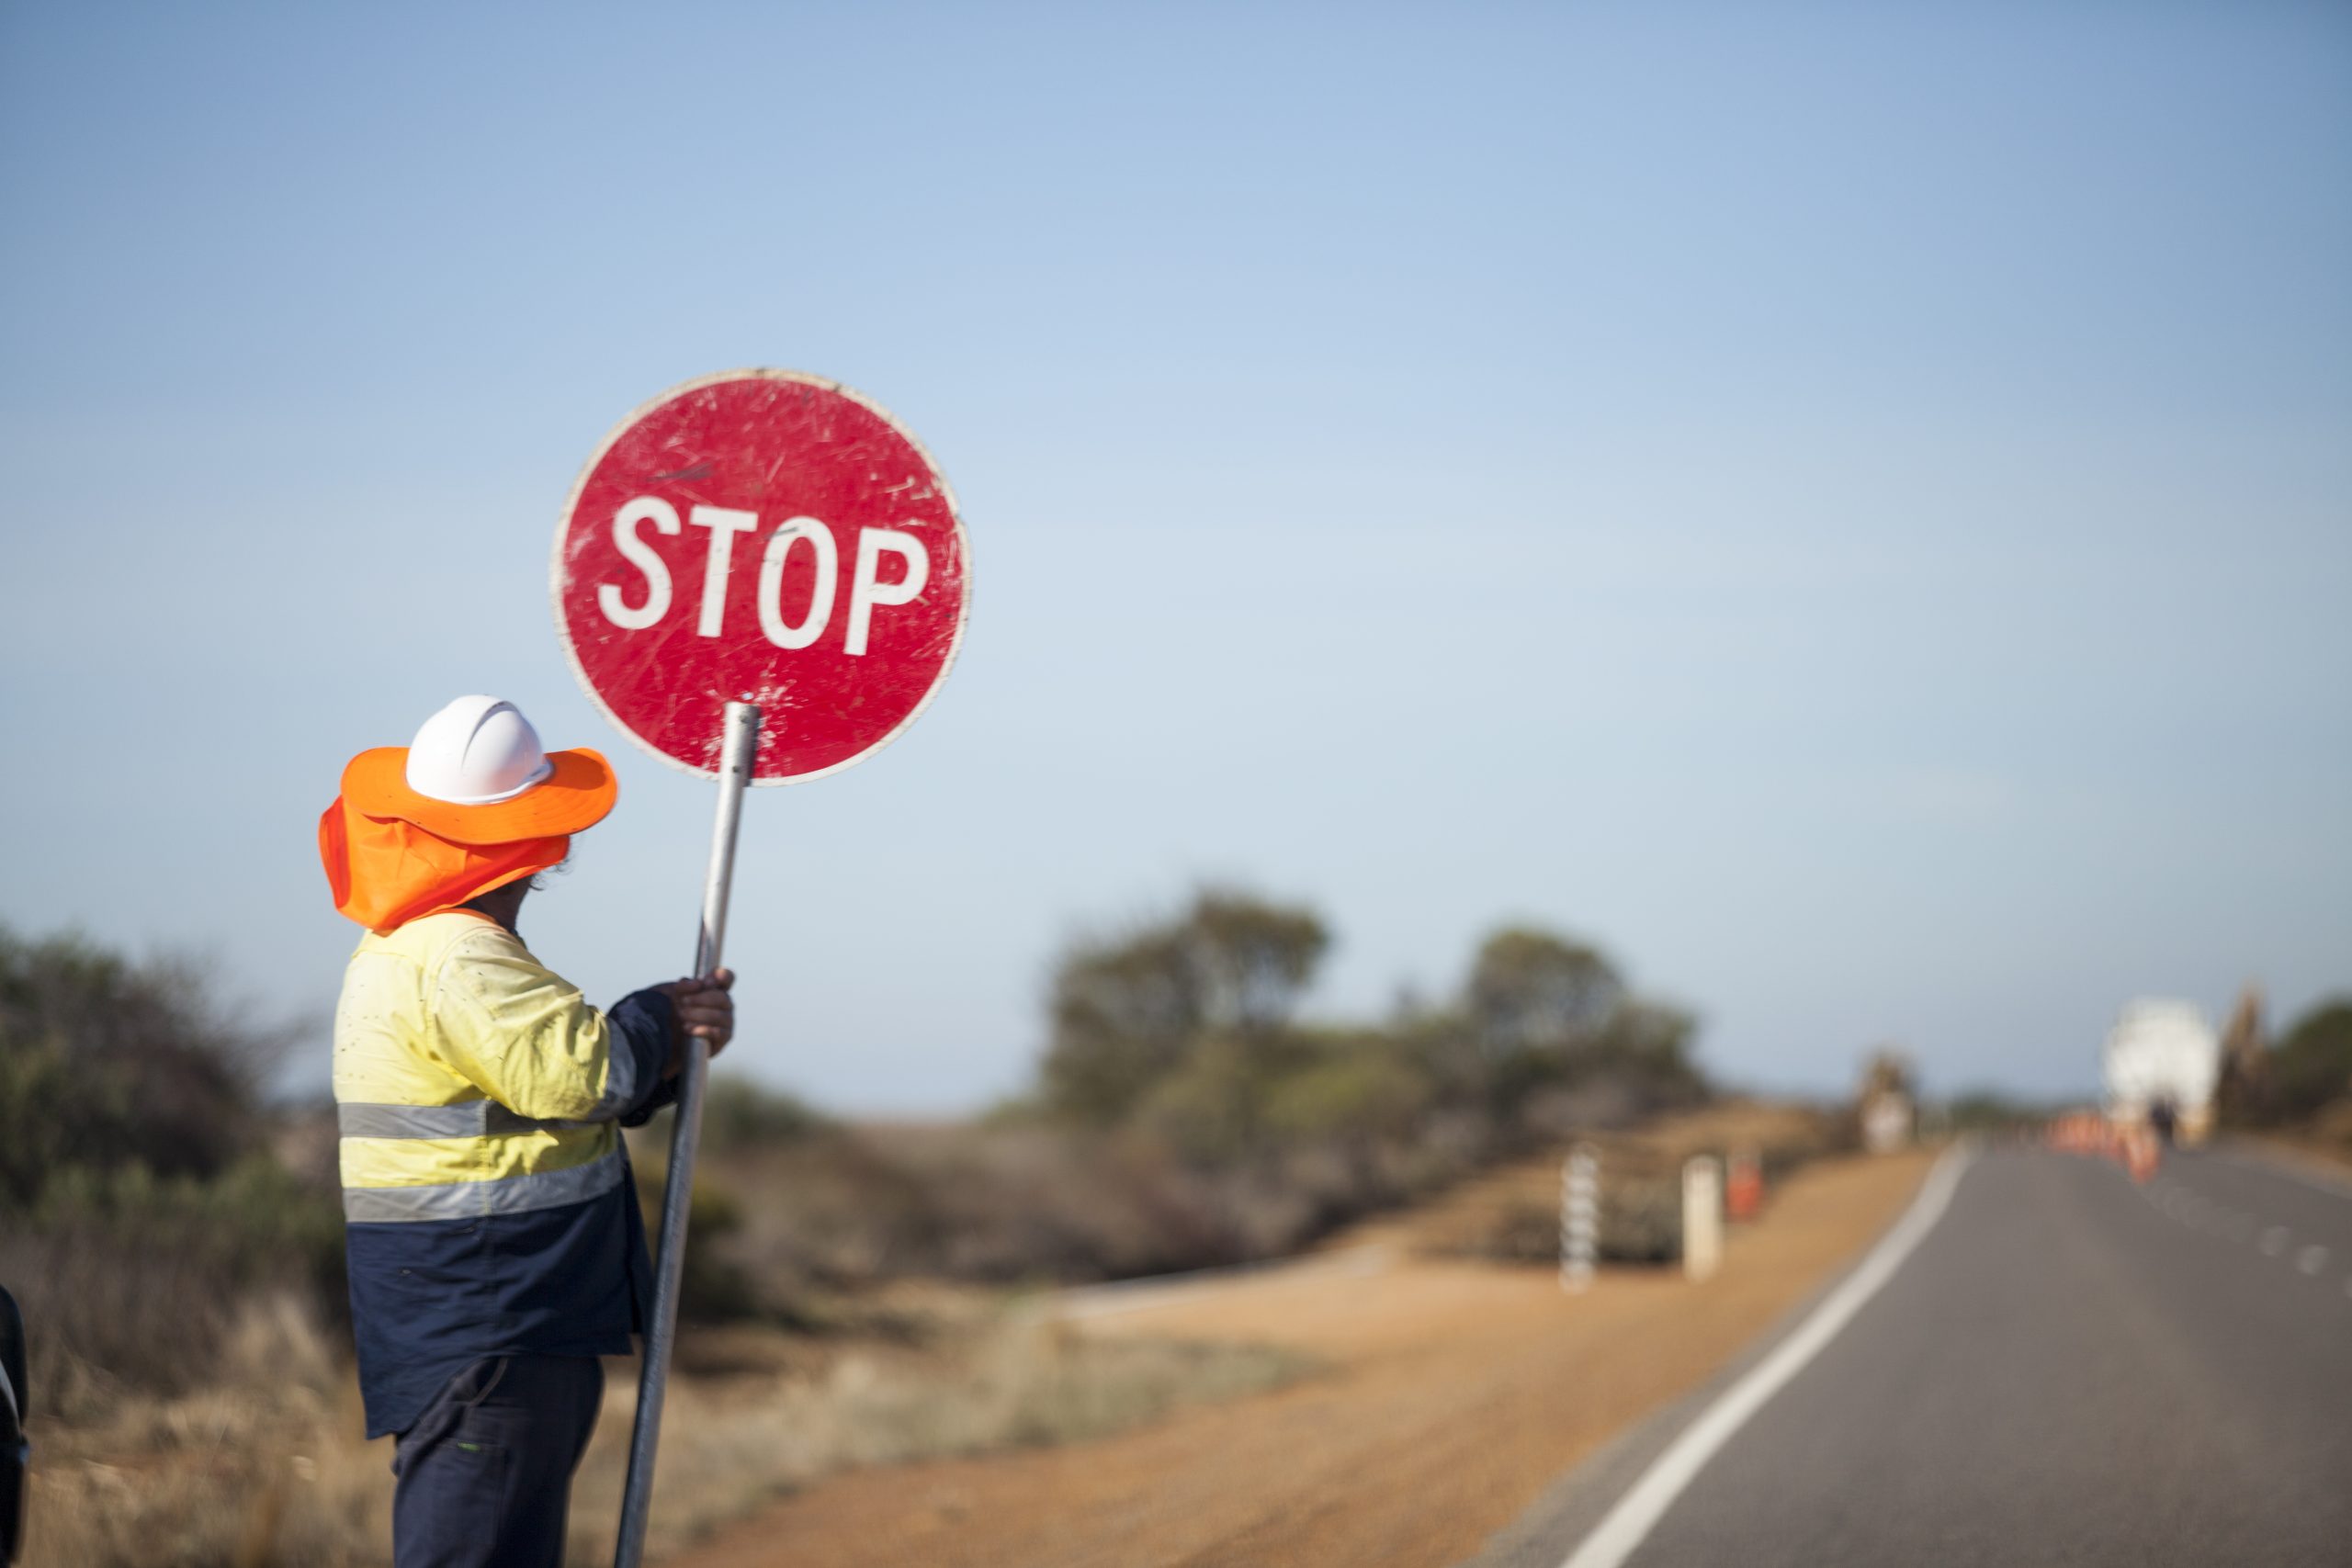 The Worker Construction Hand Hold Circle Red Road Stop Sign